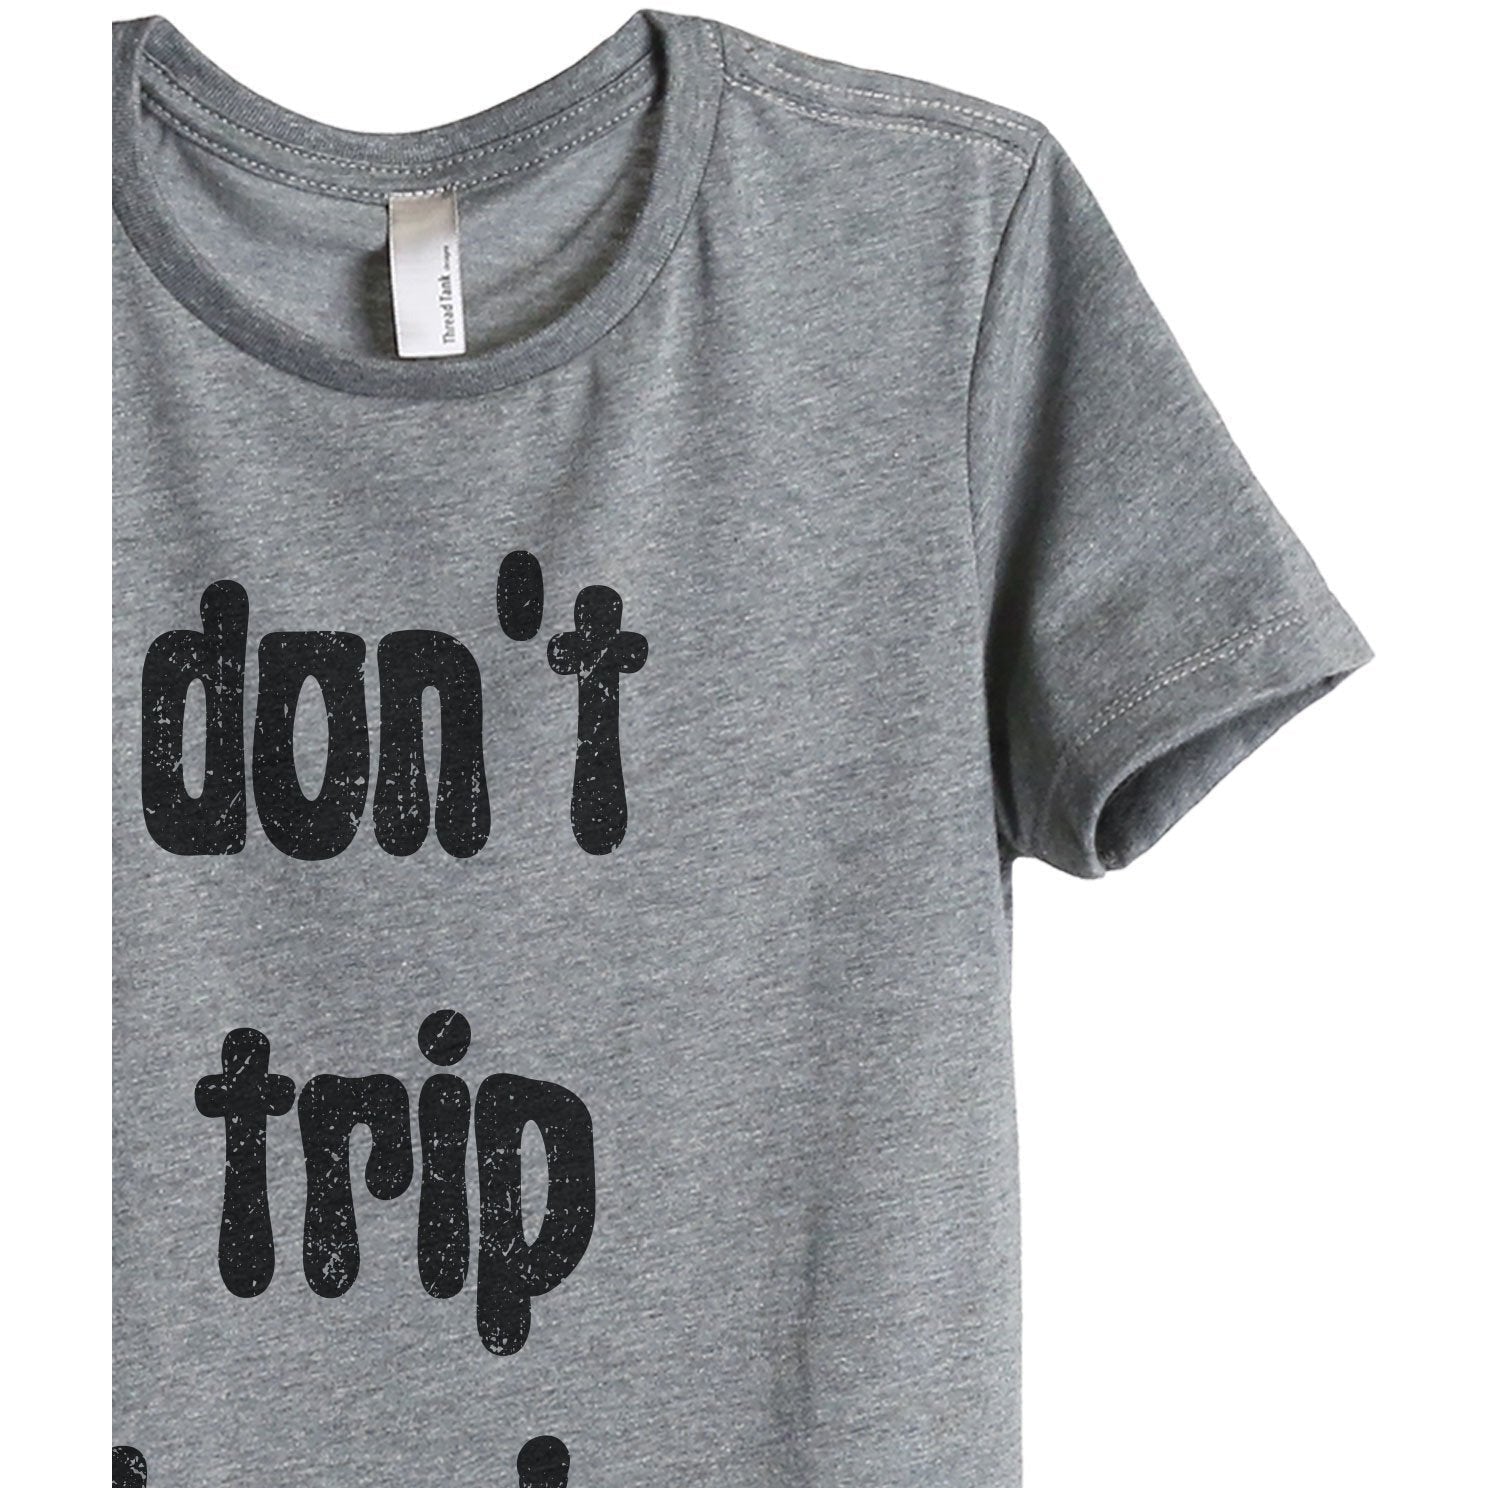 Don't Trip Homie Women's Relaxed Crewneck T-Shirt Top Tee Heather Grey Zoom Details
